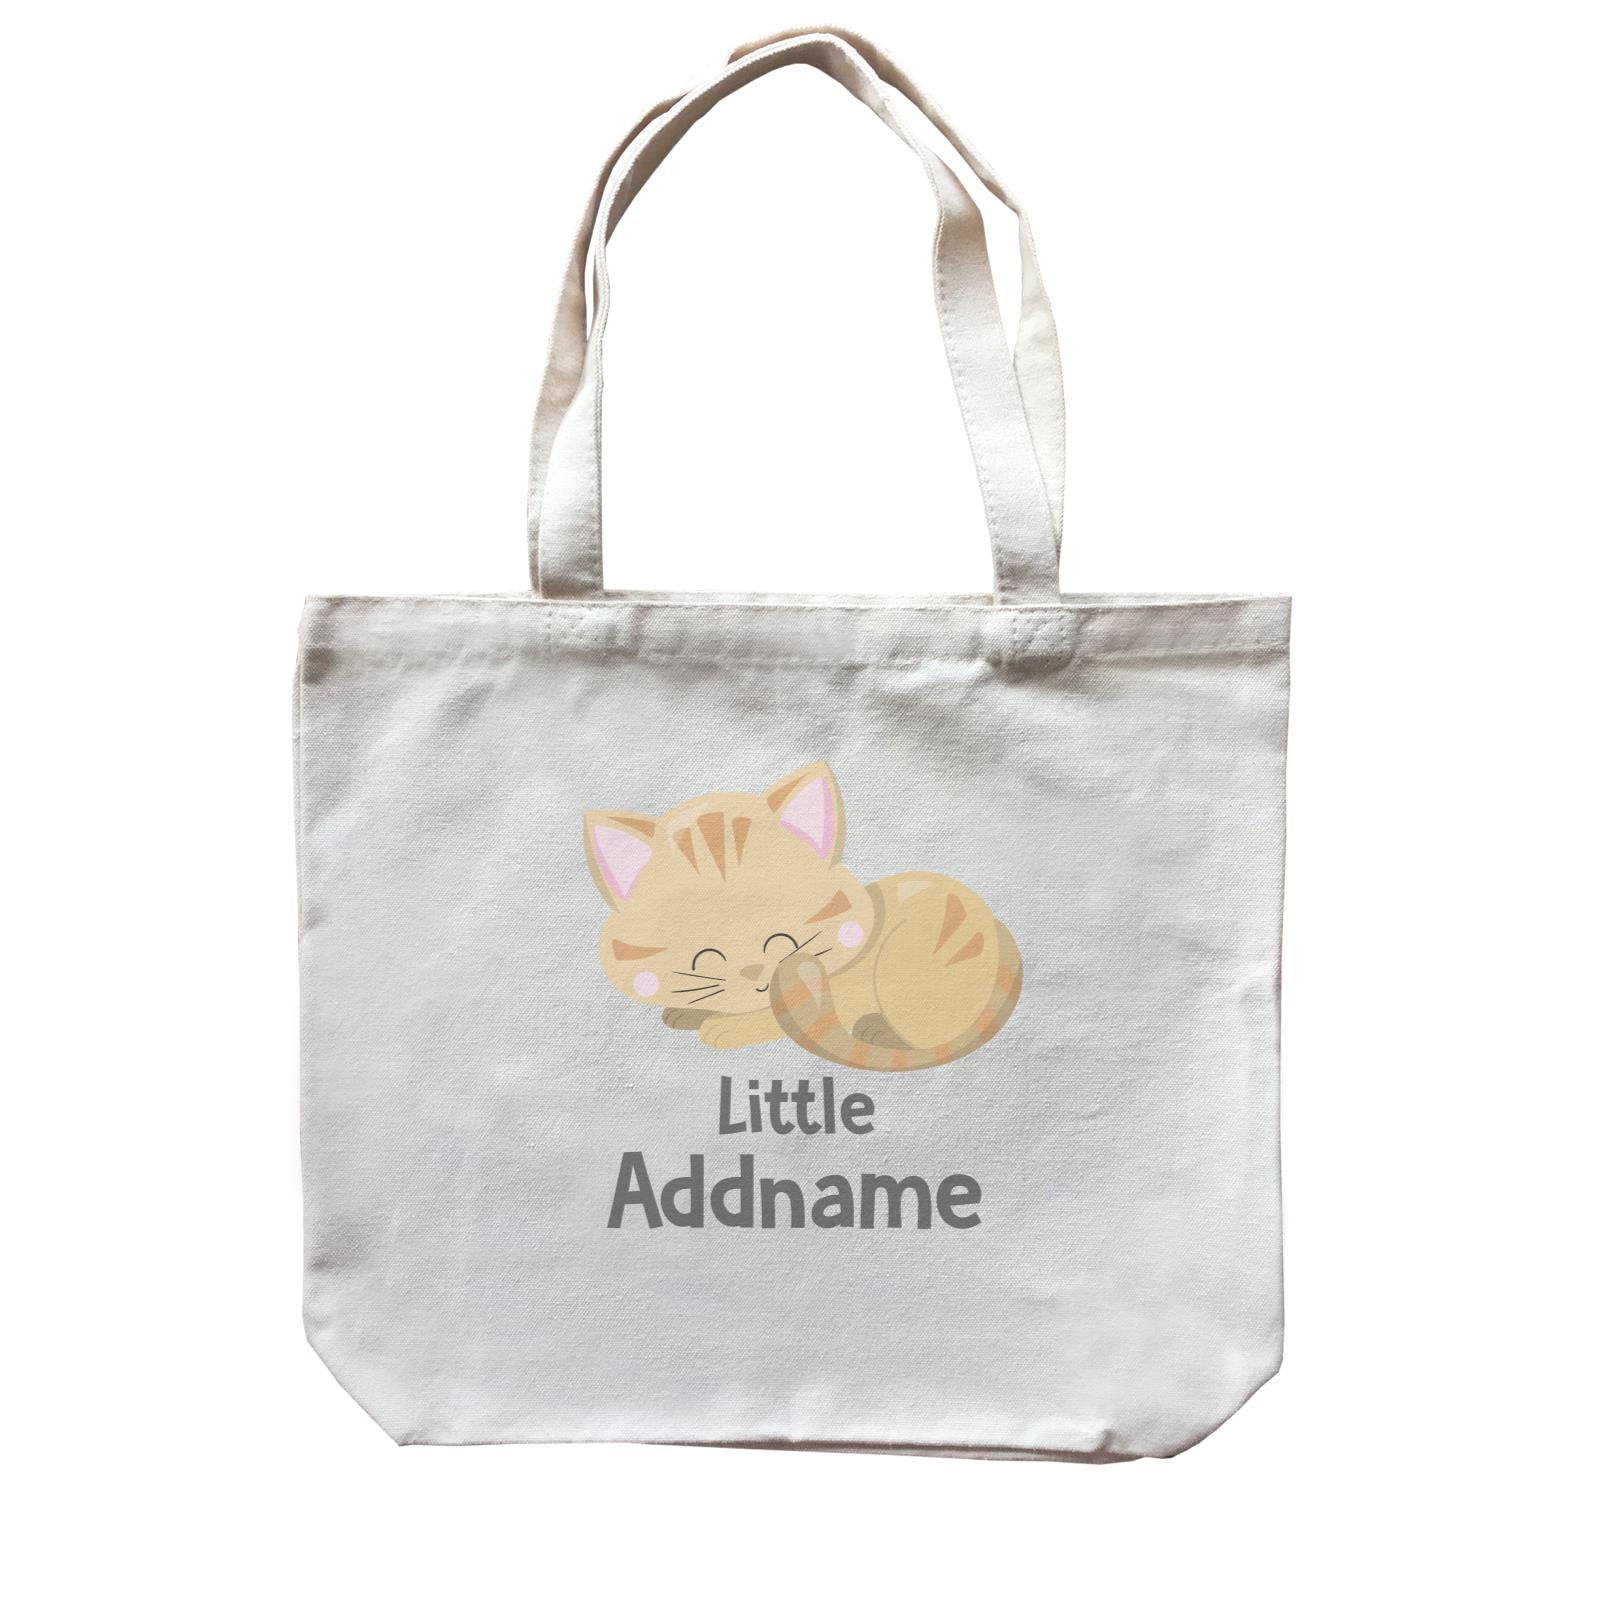 Adorable Cats Light Brown Cat Little Addname Canvas Bag